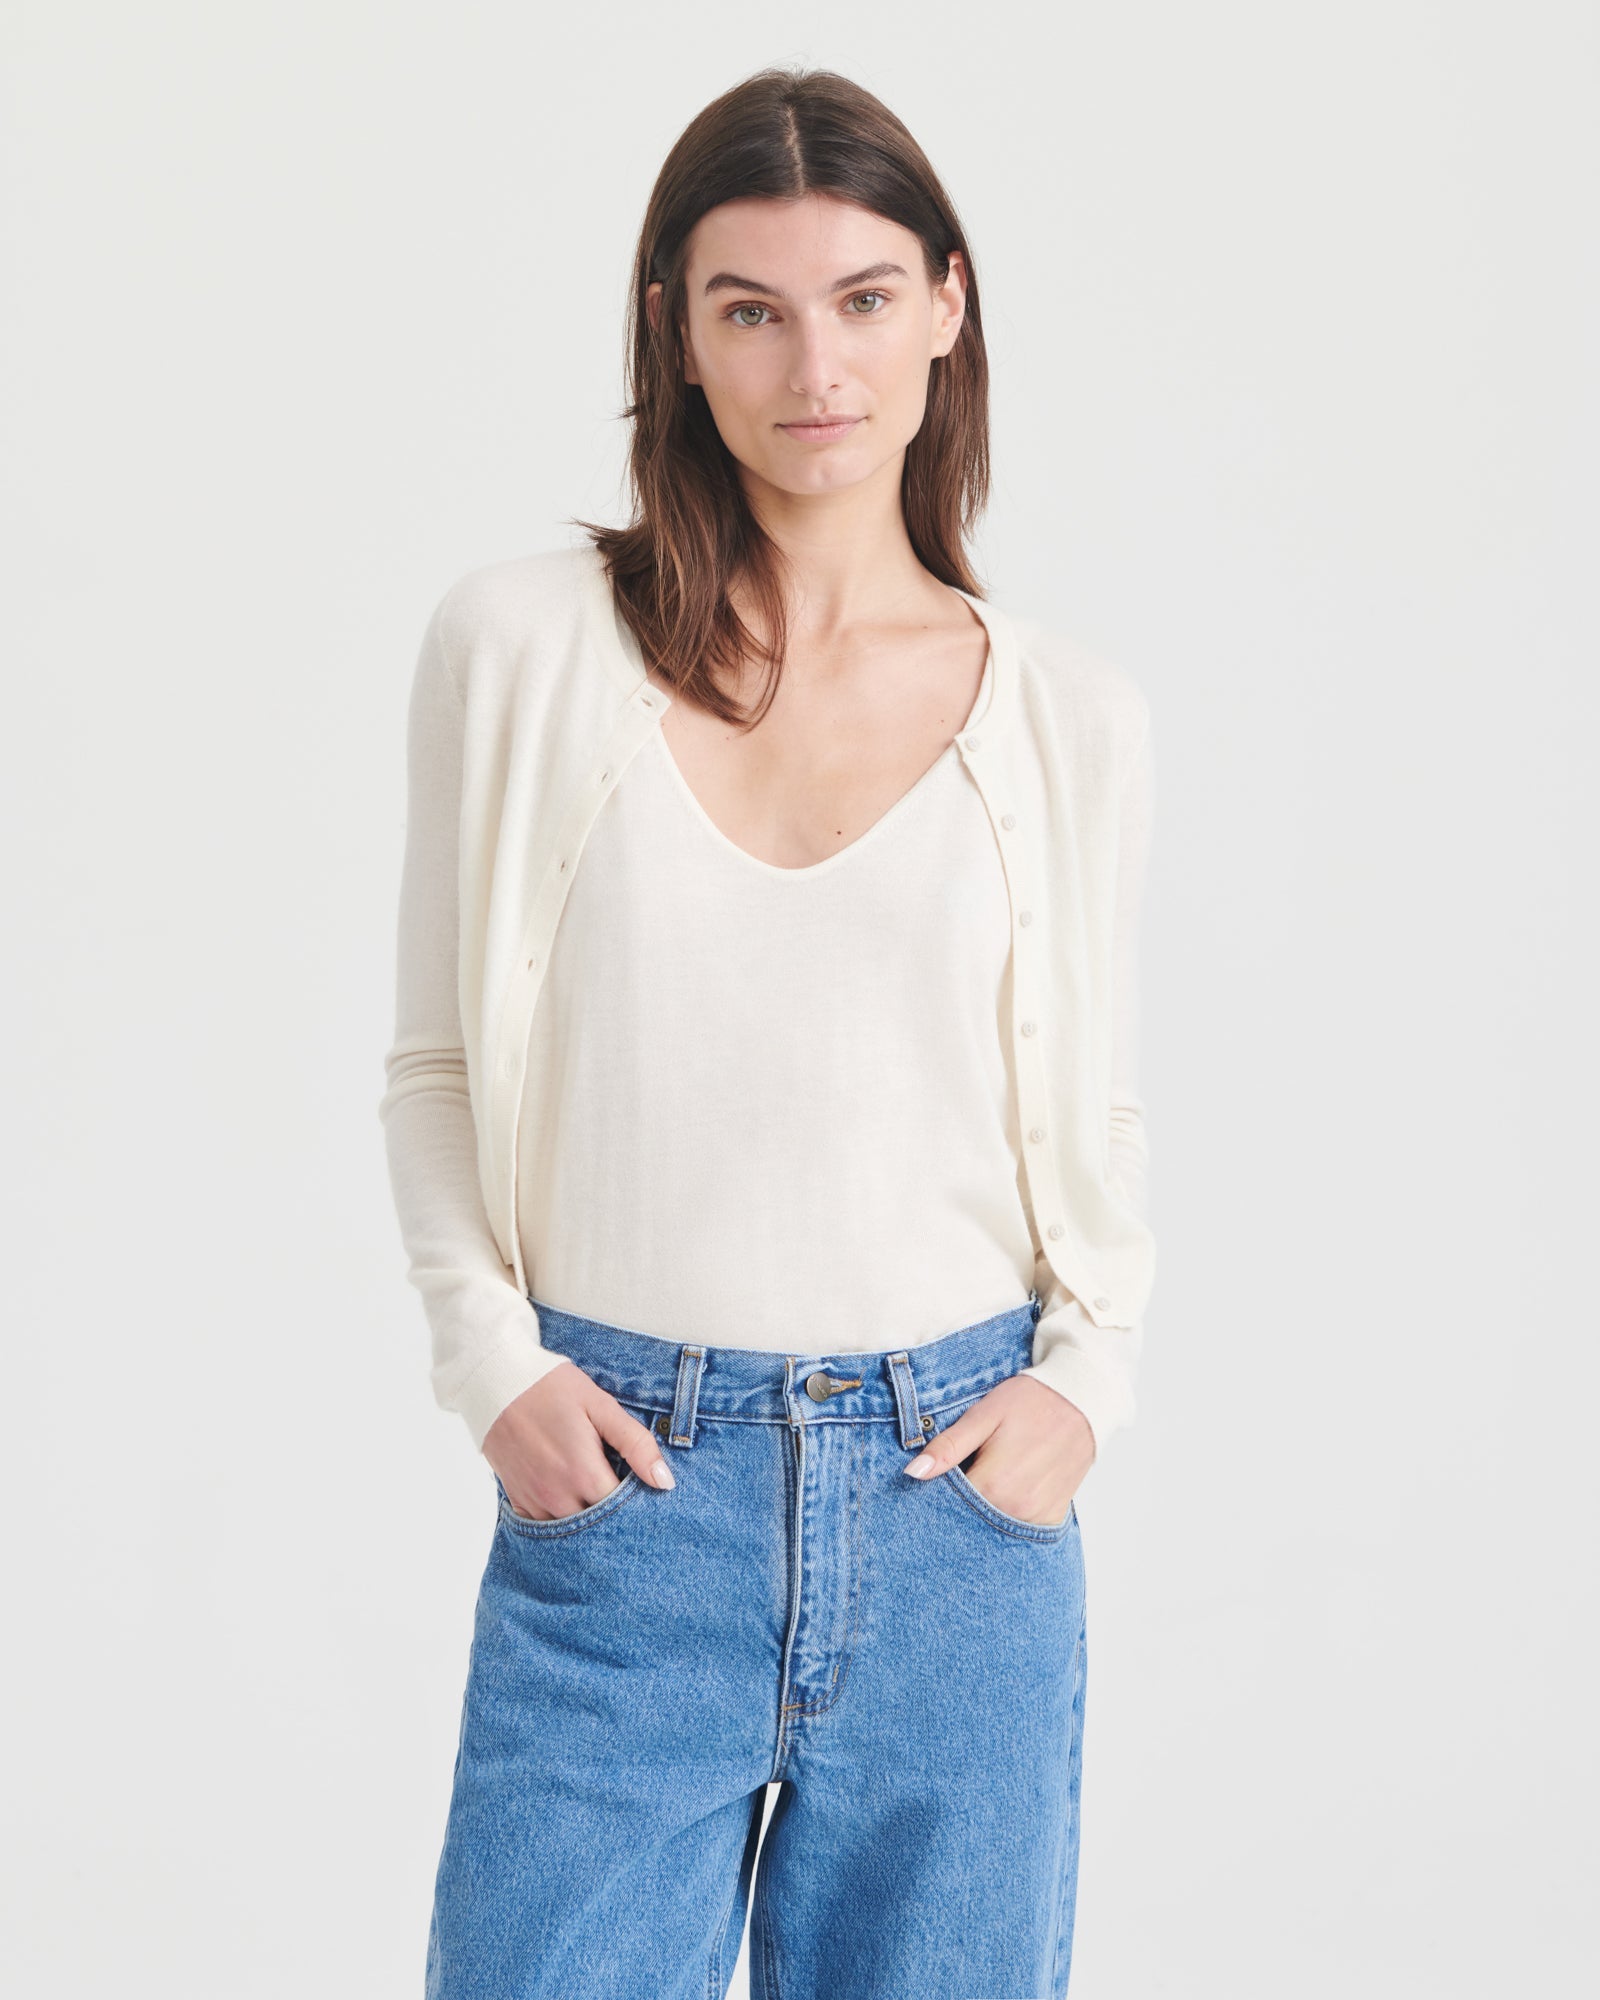 Soft White, Cashmere Cropped Cardigan